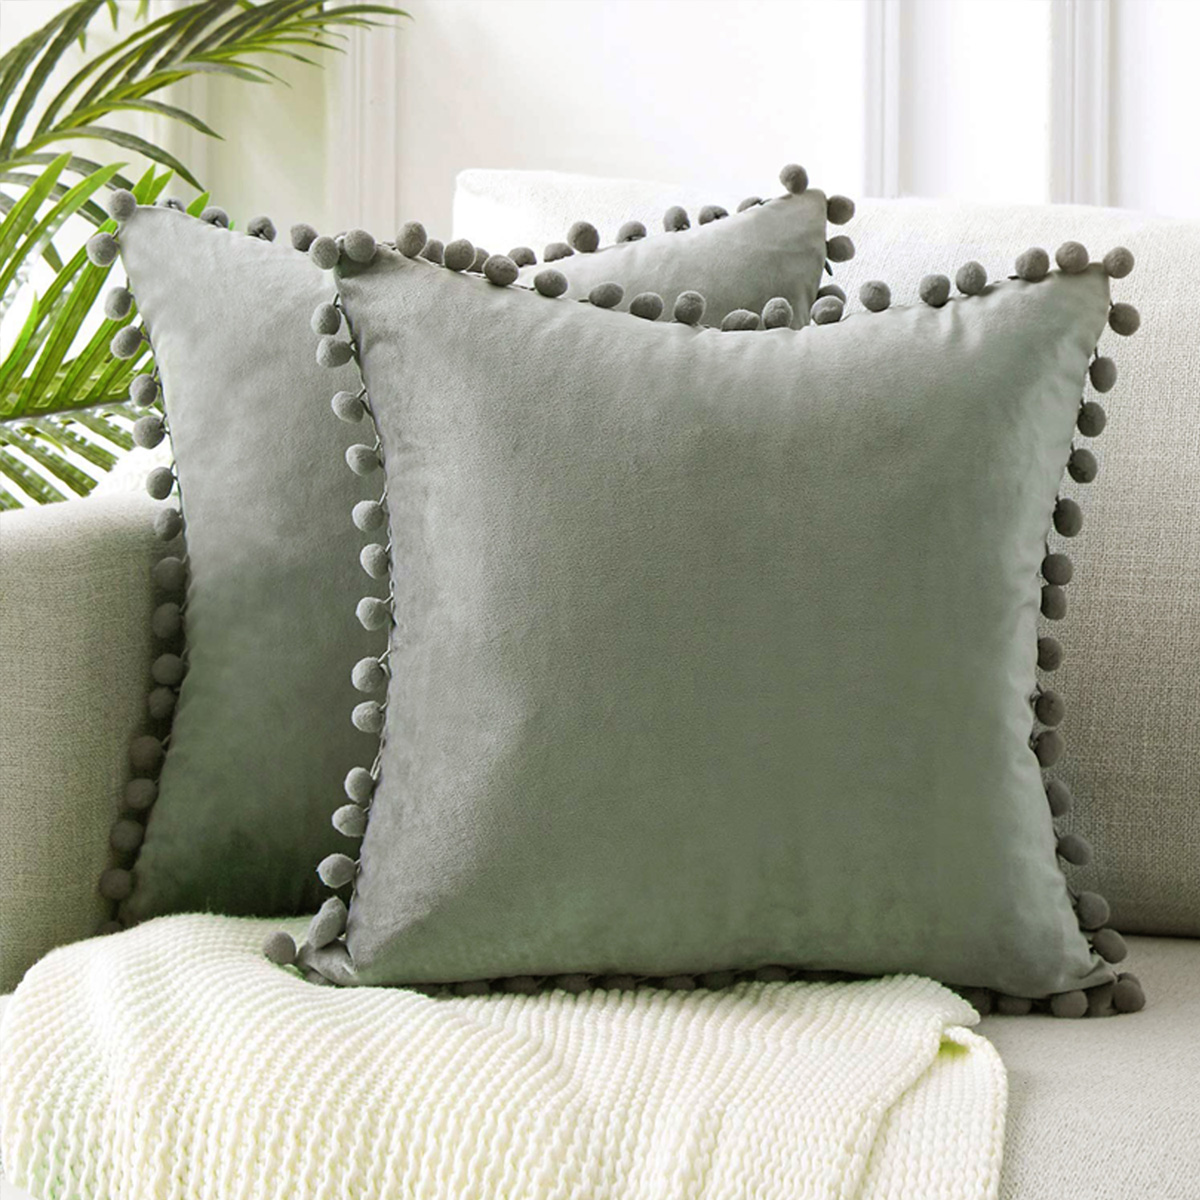 4545cm-Soft-Velvet-Pillow-Covers-Cute-Pom-Poms-Throw-Pillow-Covers-Square-Cushion-Case-for-Sofa-Couc-1779027-10